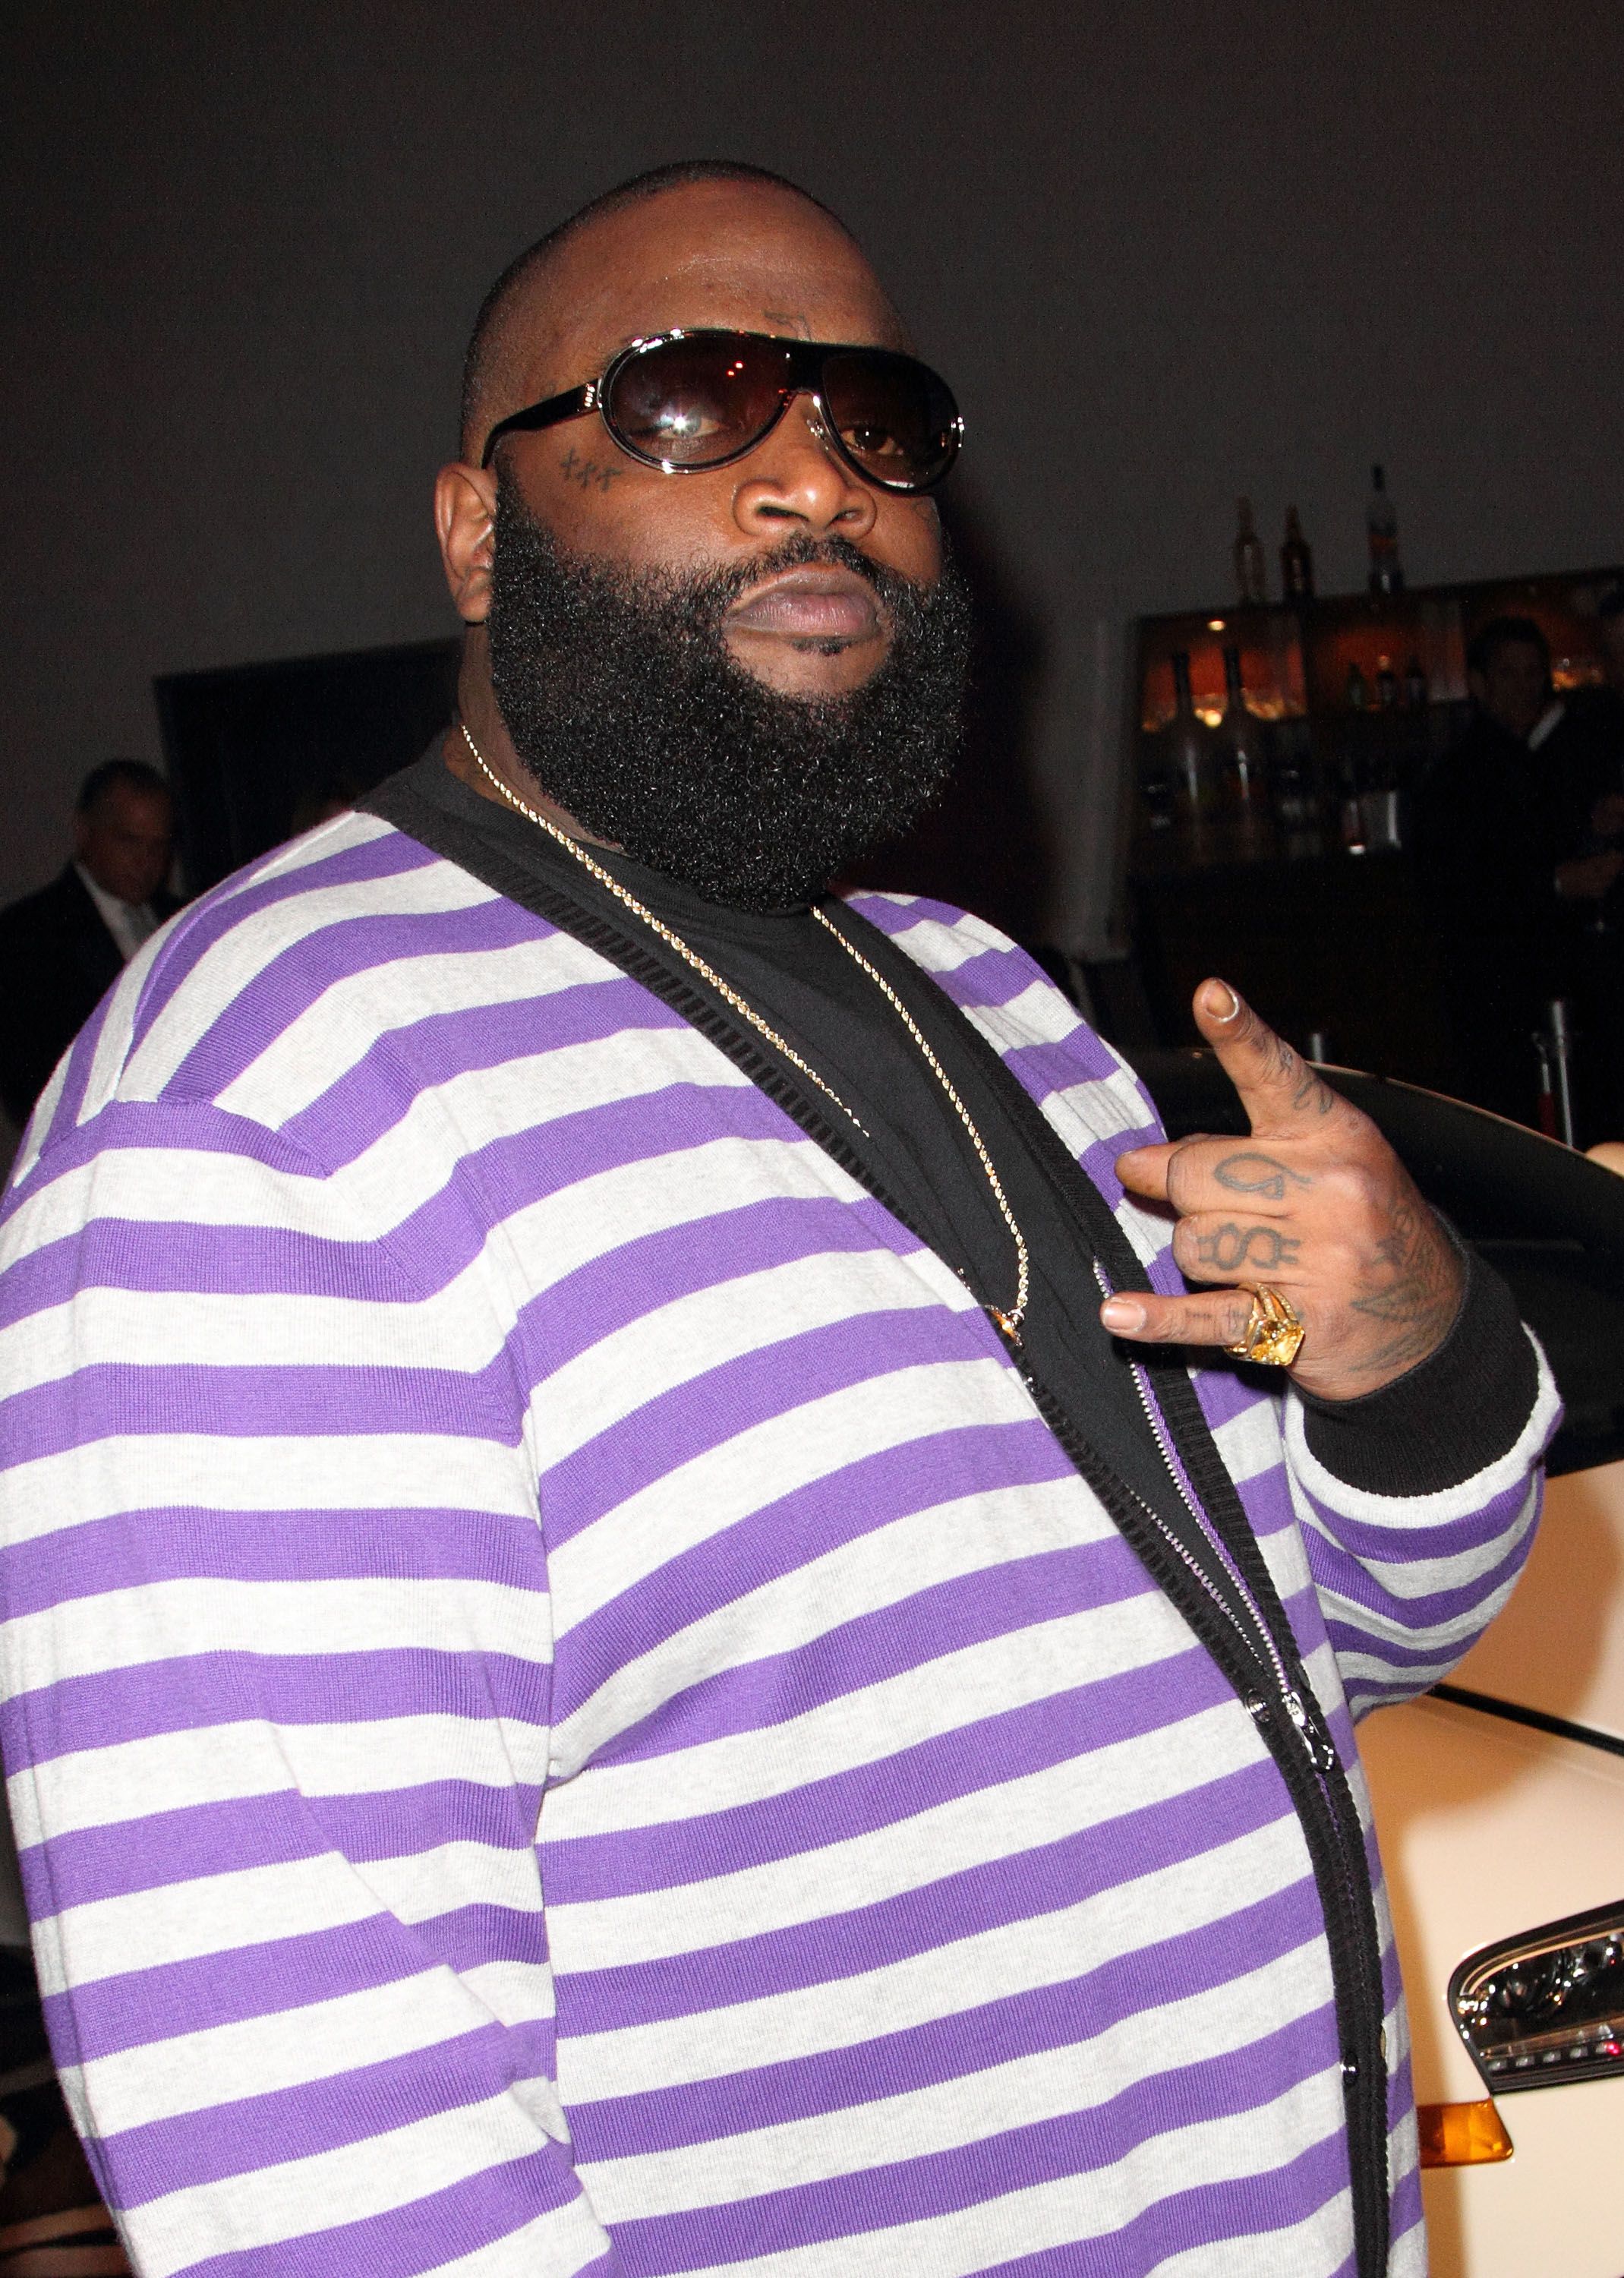 Rick Ross attends the 15th anniversary of The Blacks Annual Gala on February 27, 2010 in Miami Beach, Florida. | Source: Getty Images